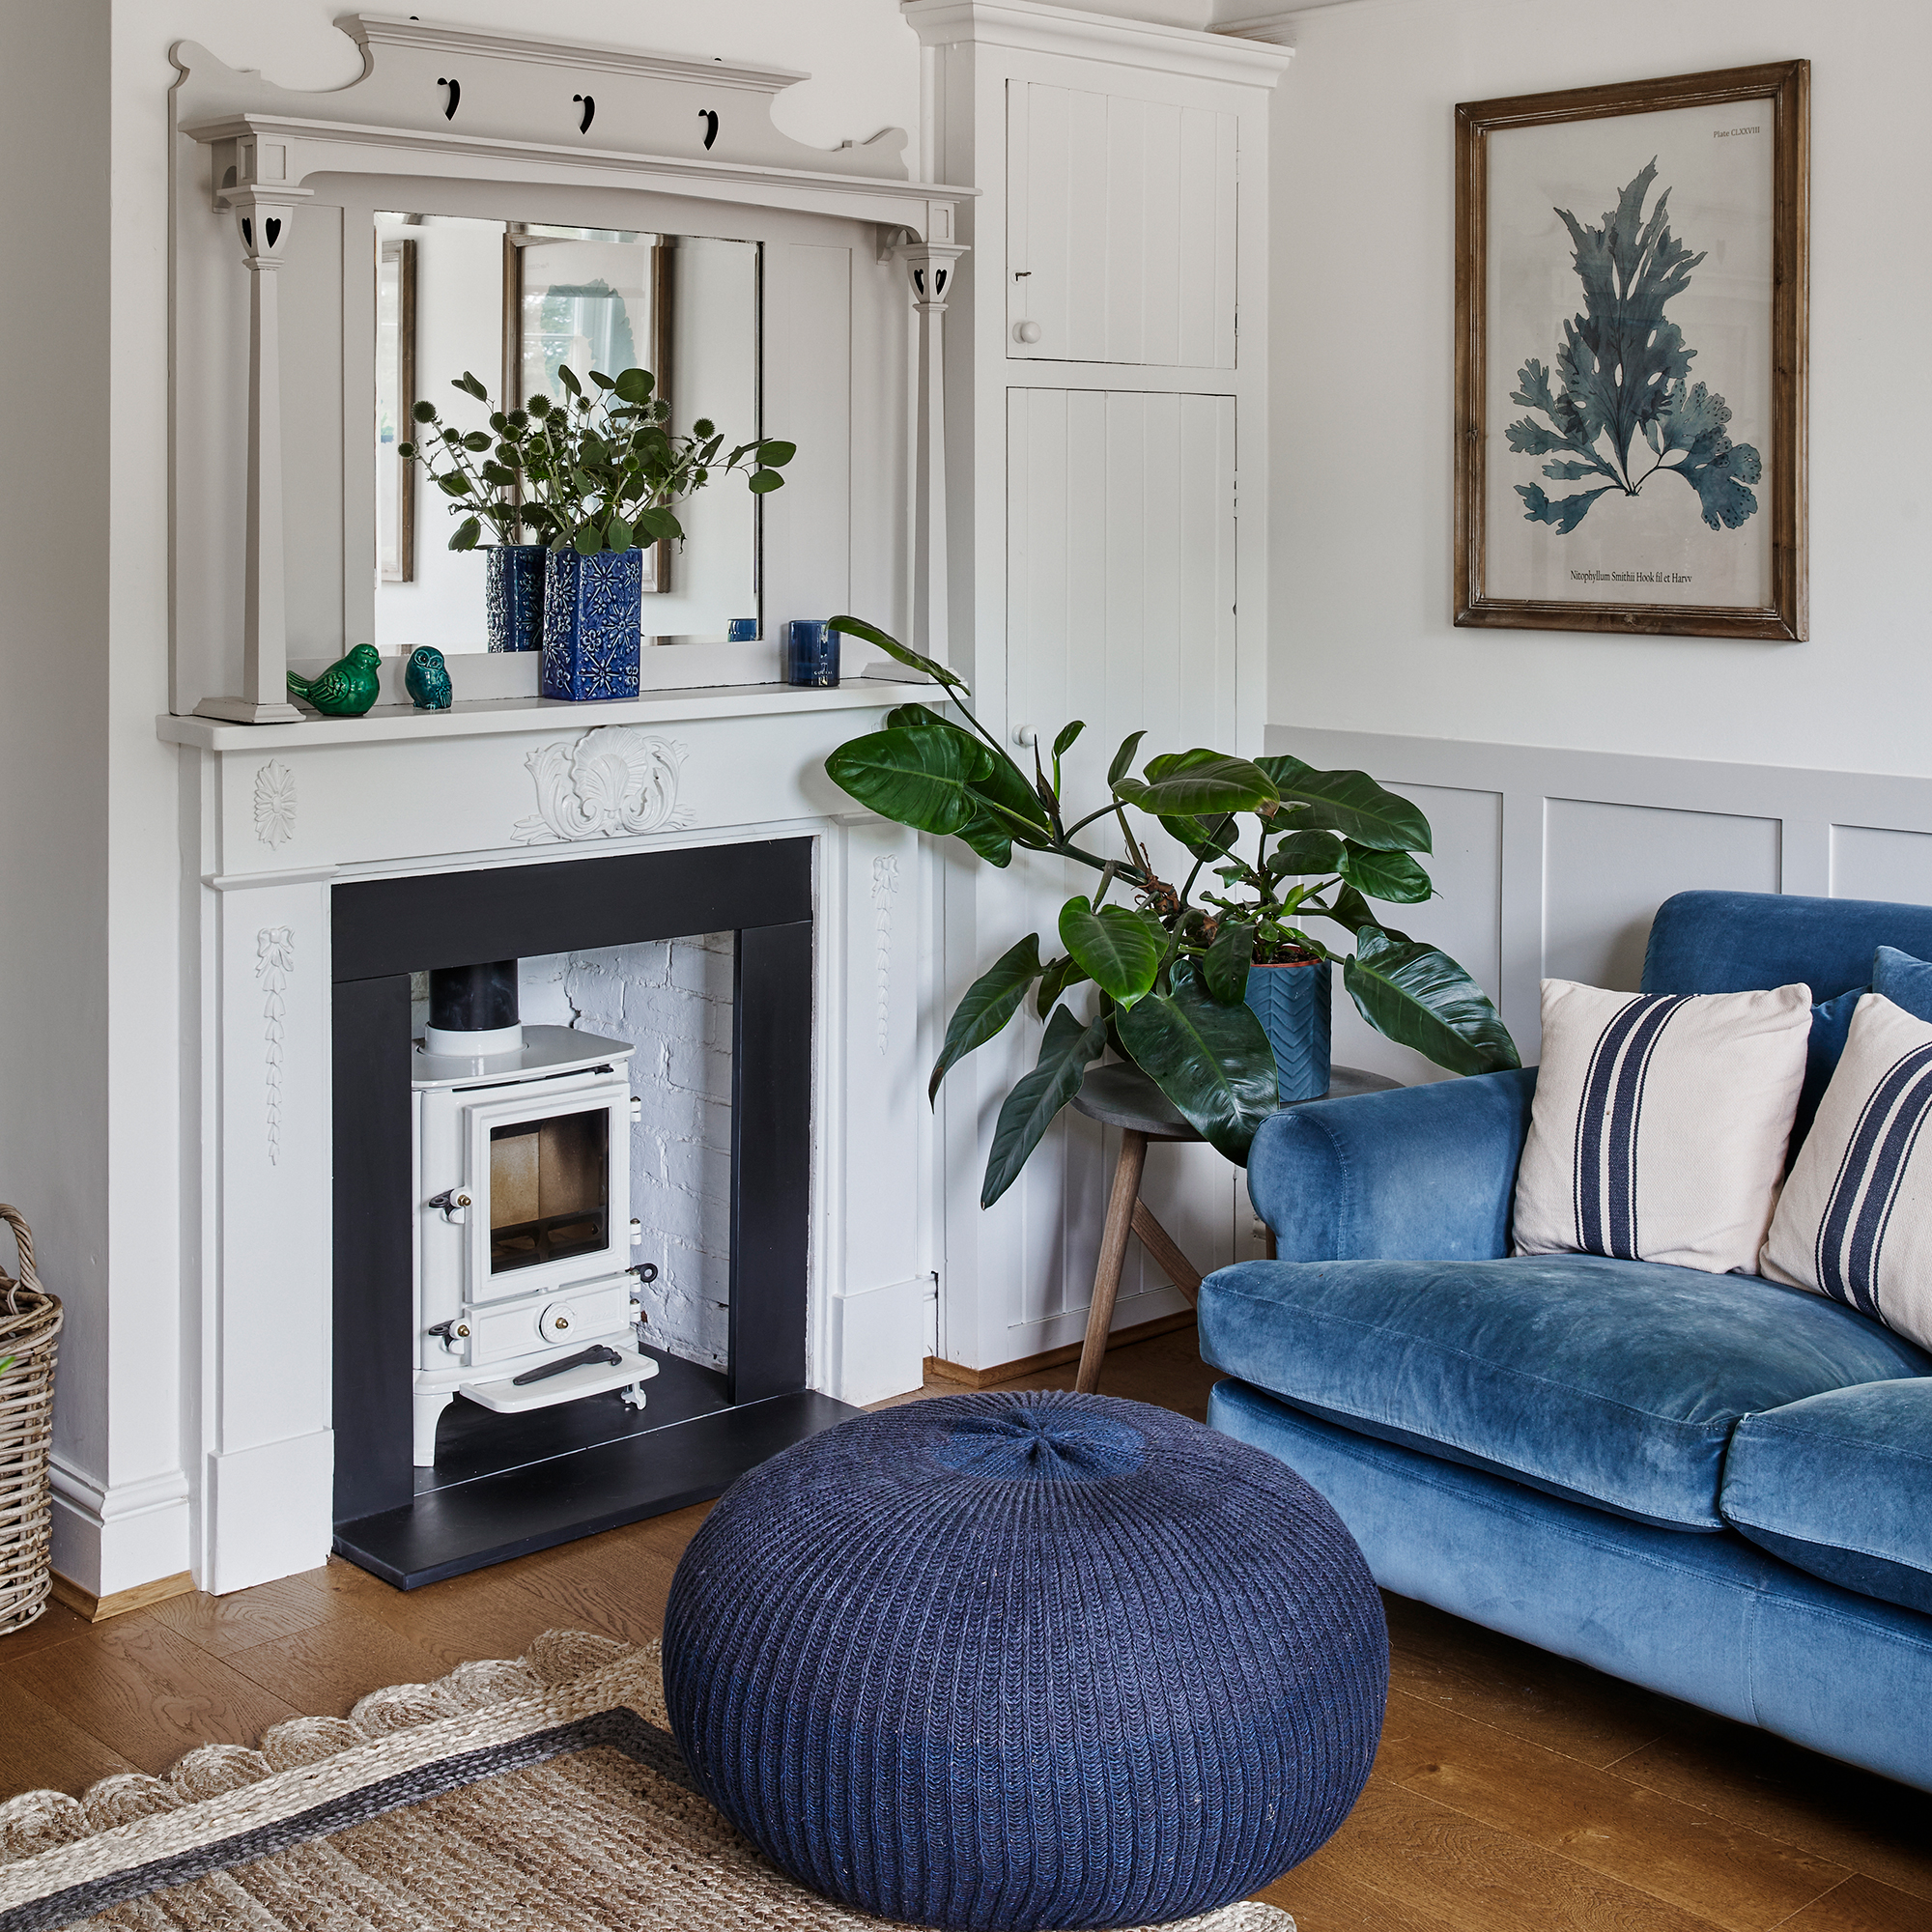 fireplace with white stove in a coastal style blue and white living room